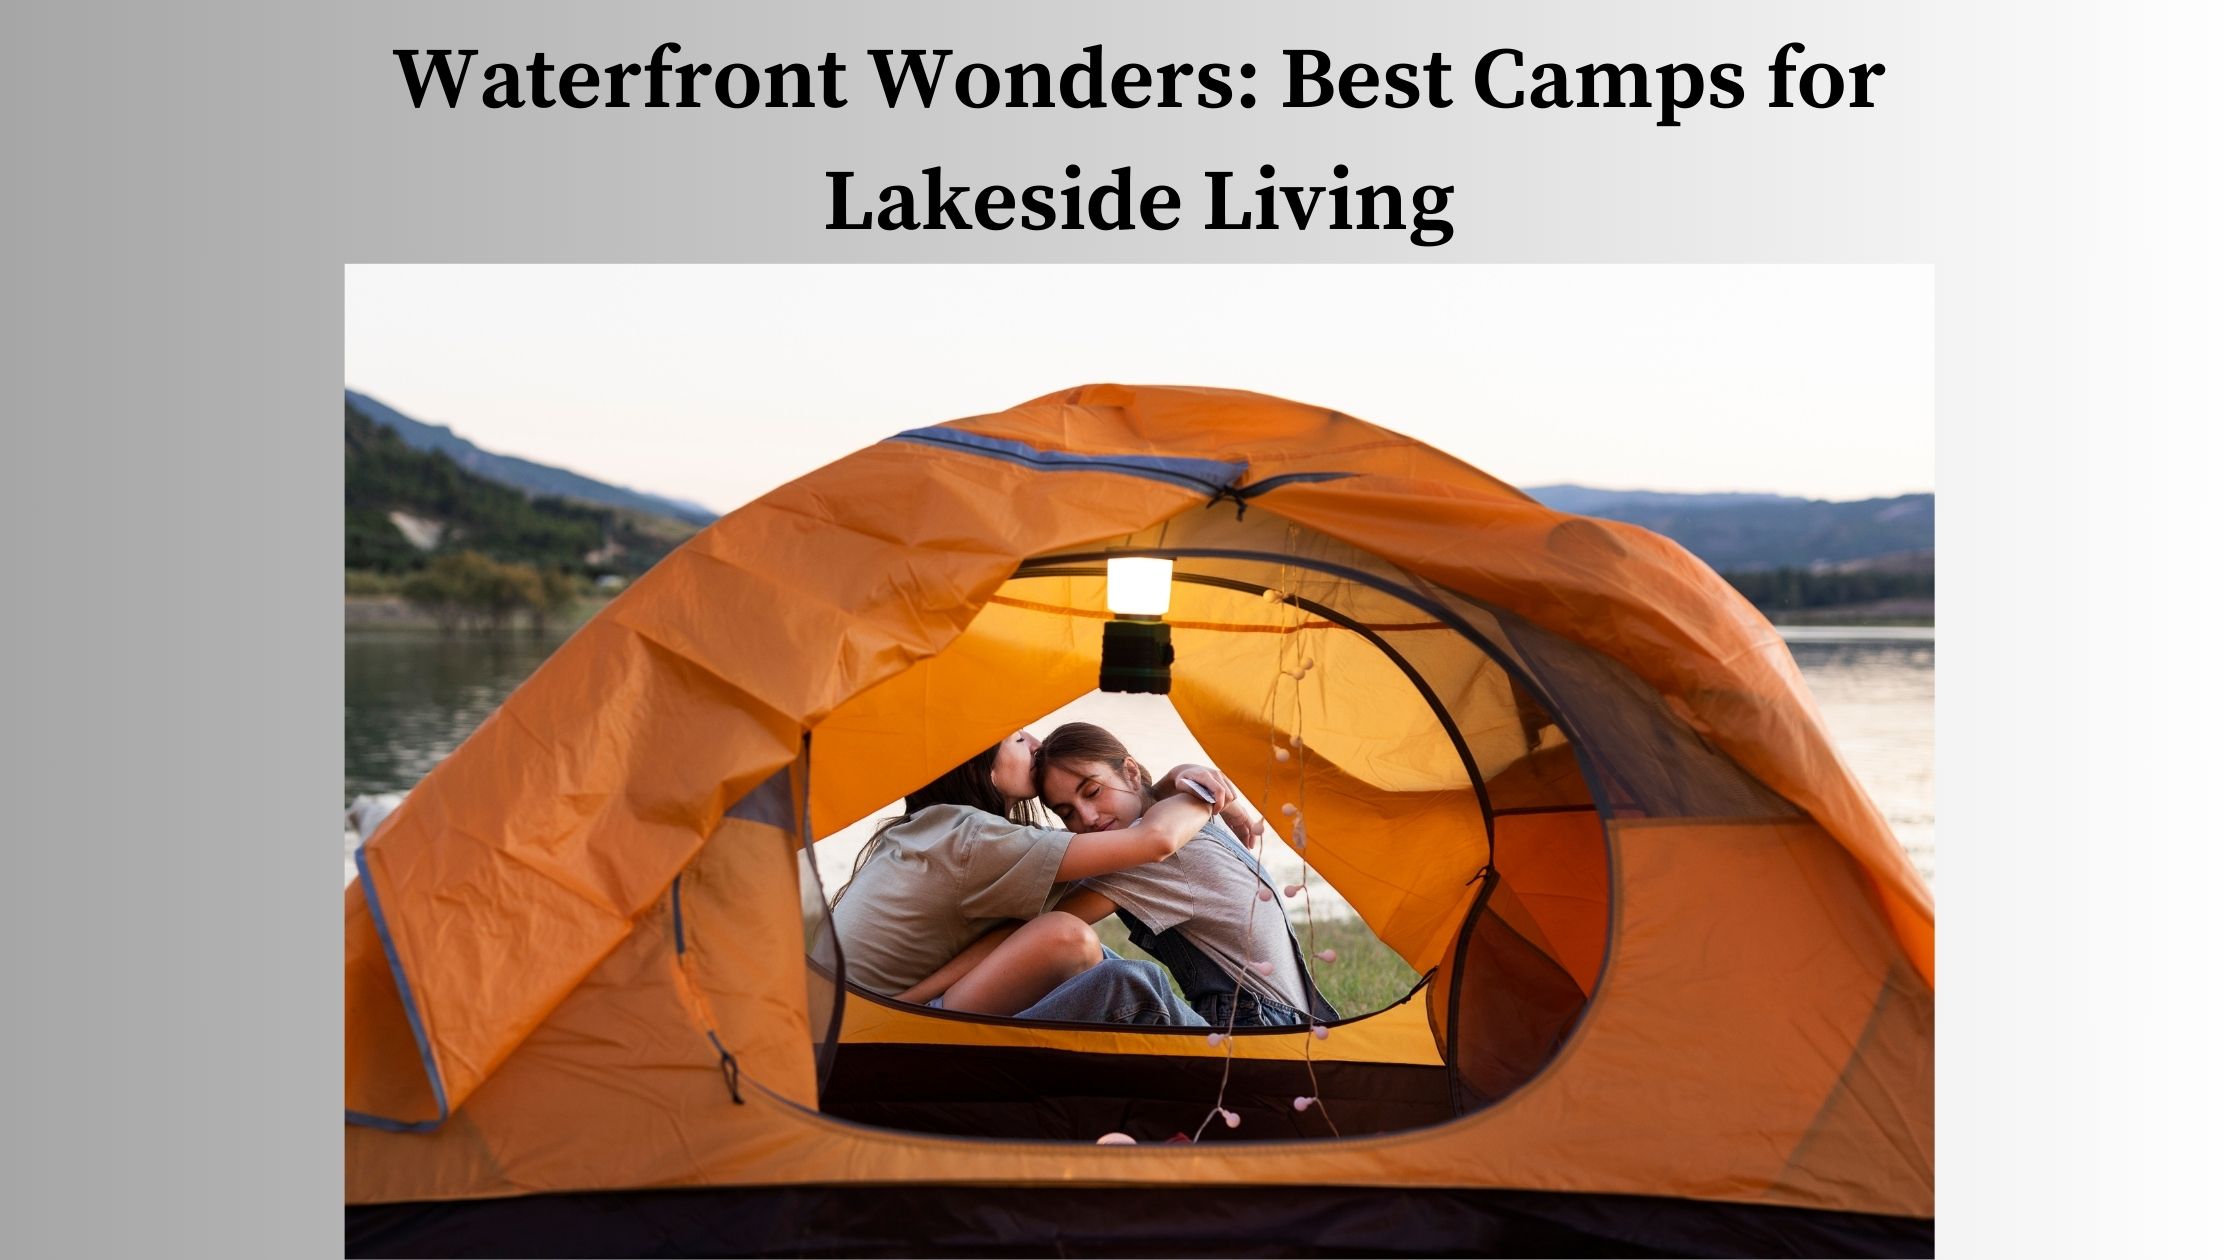 Waterfront Wonders: Best Camps for Lakeside Living